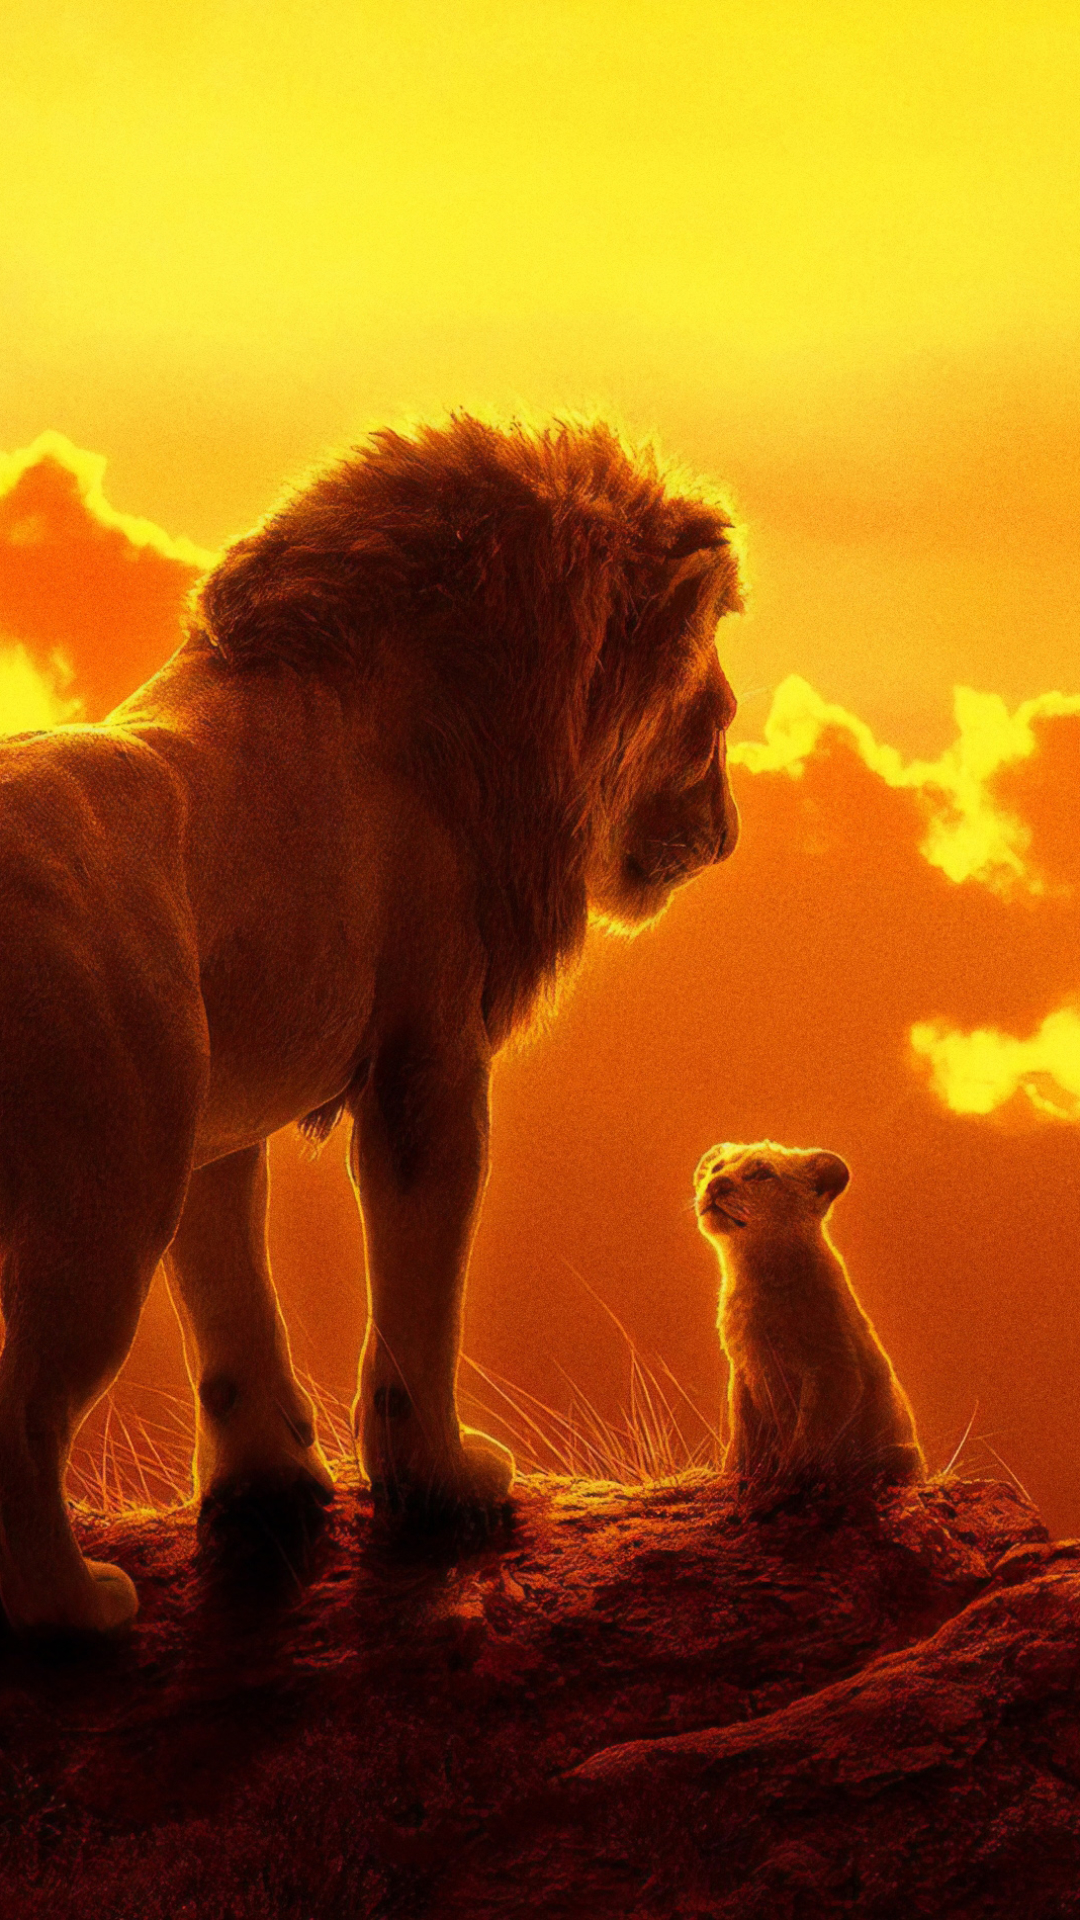 movie, the lion king (2019)